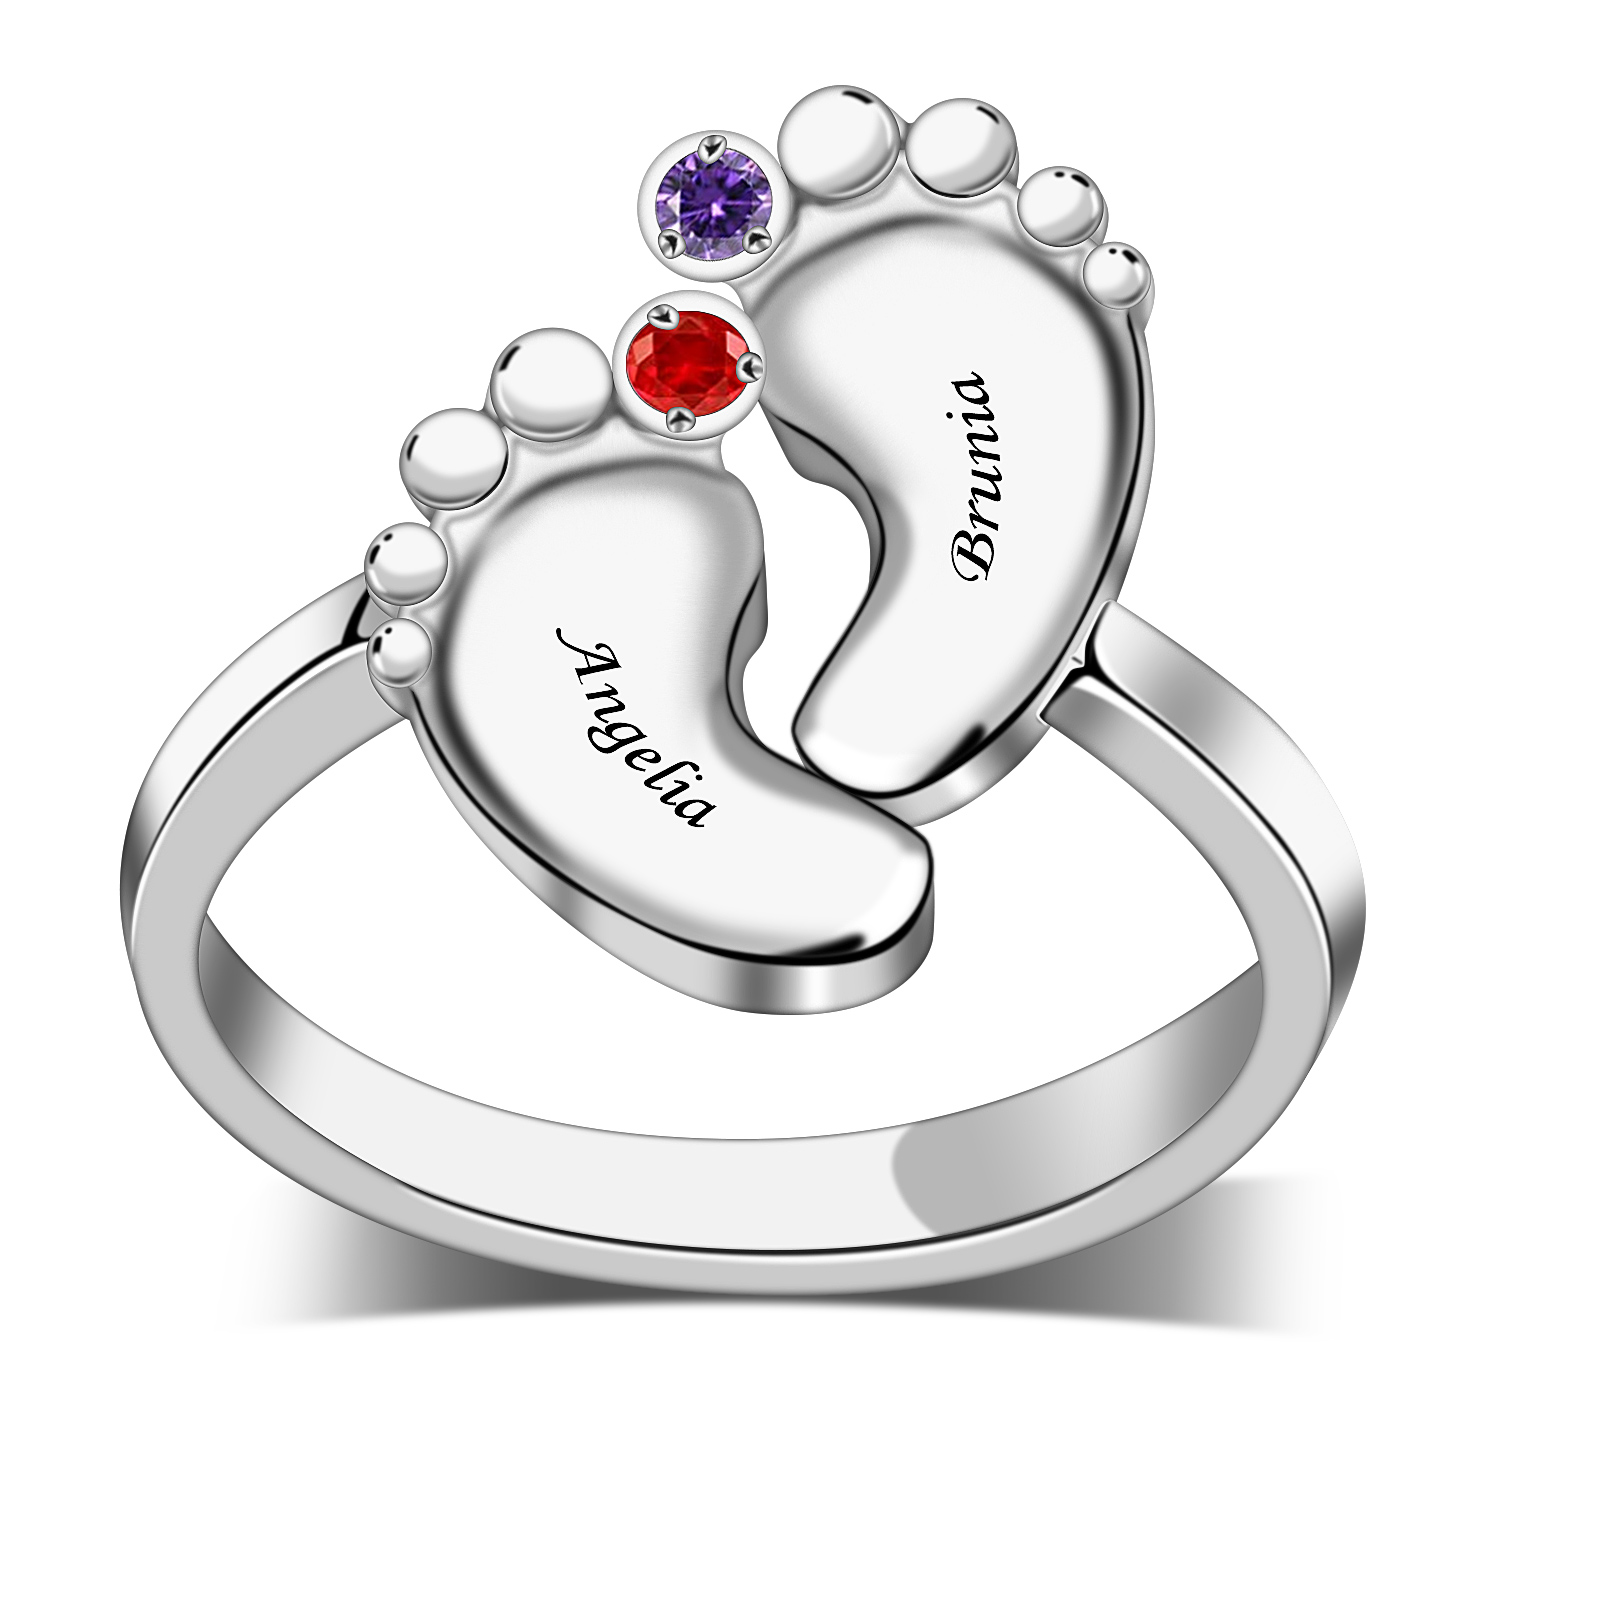 R1-1 Baby Feet Ring with Birthstones and Engraved Custom Name